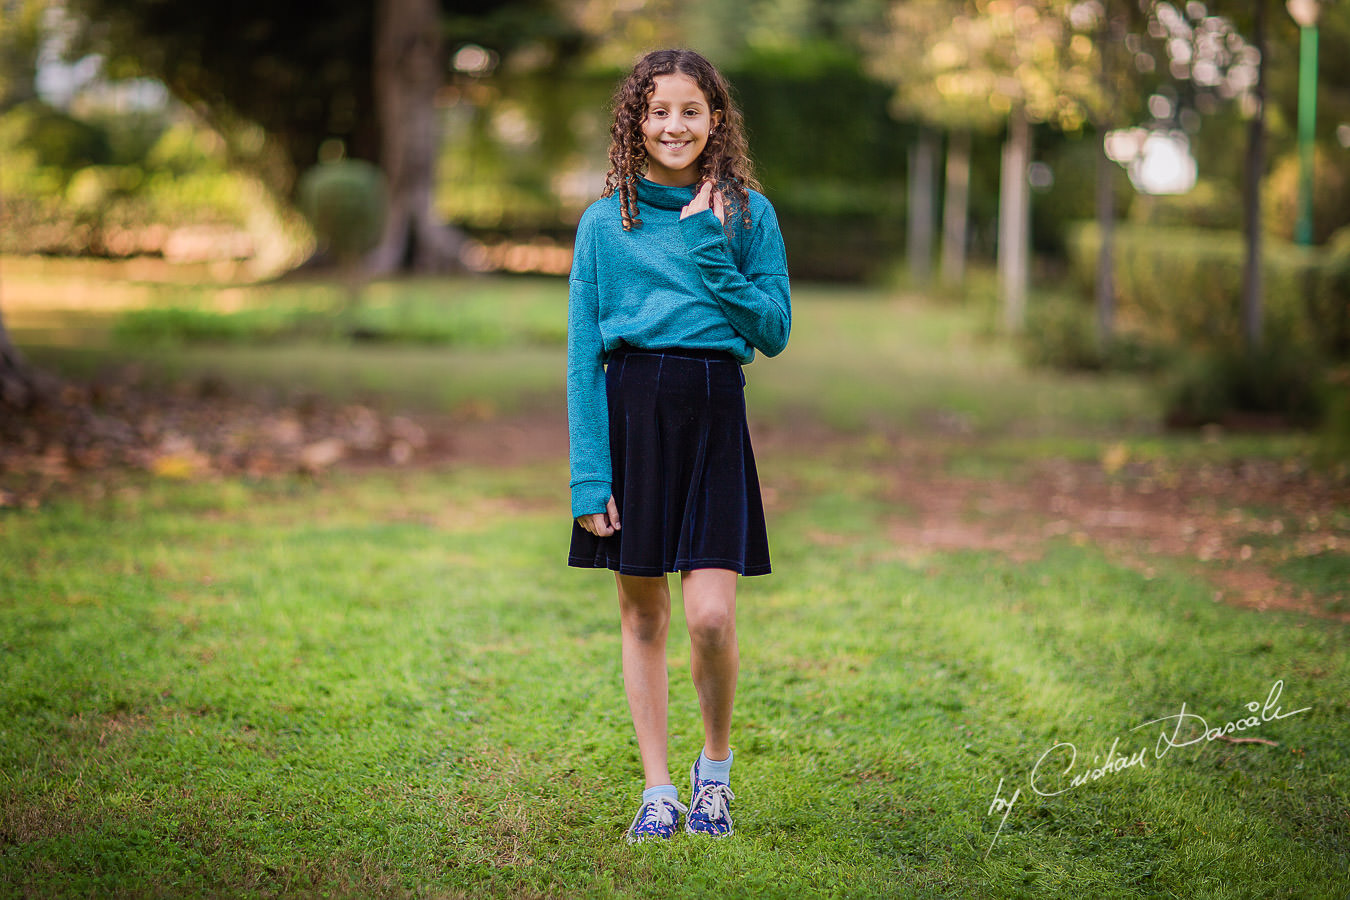 Portrait of a young lady in the park, moments captured by Cristian Dascalu during a beautiful Limassol family photography photo session.